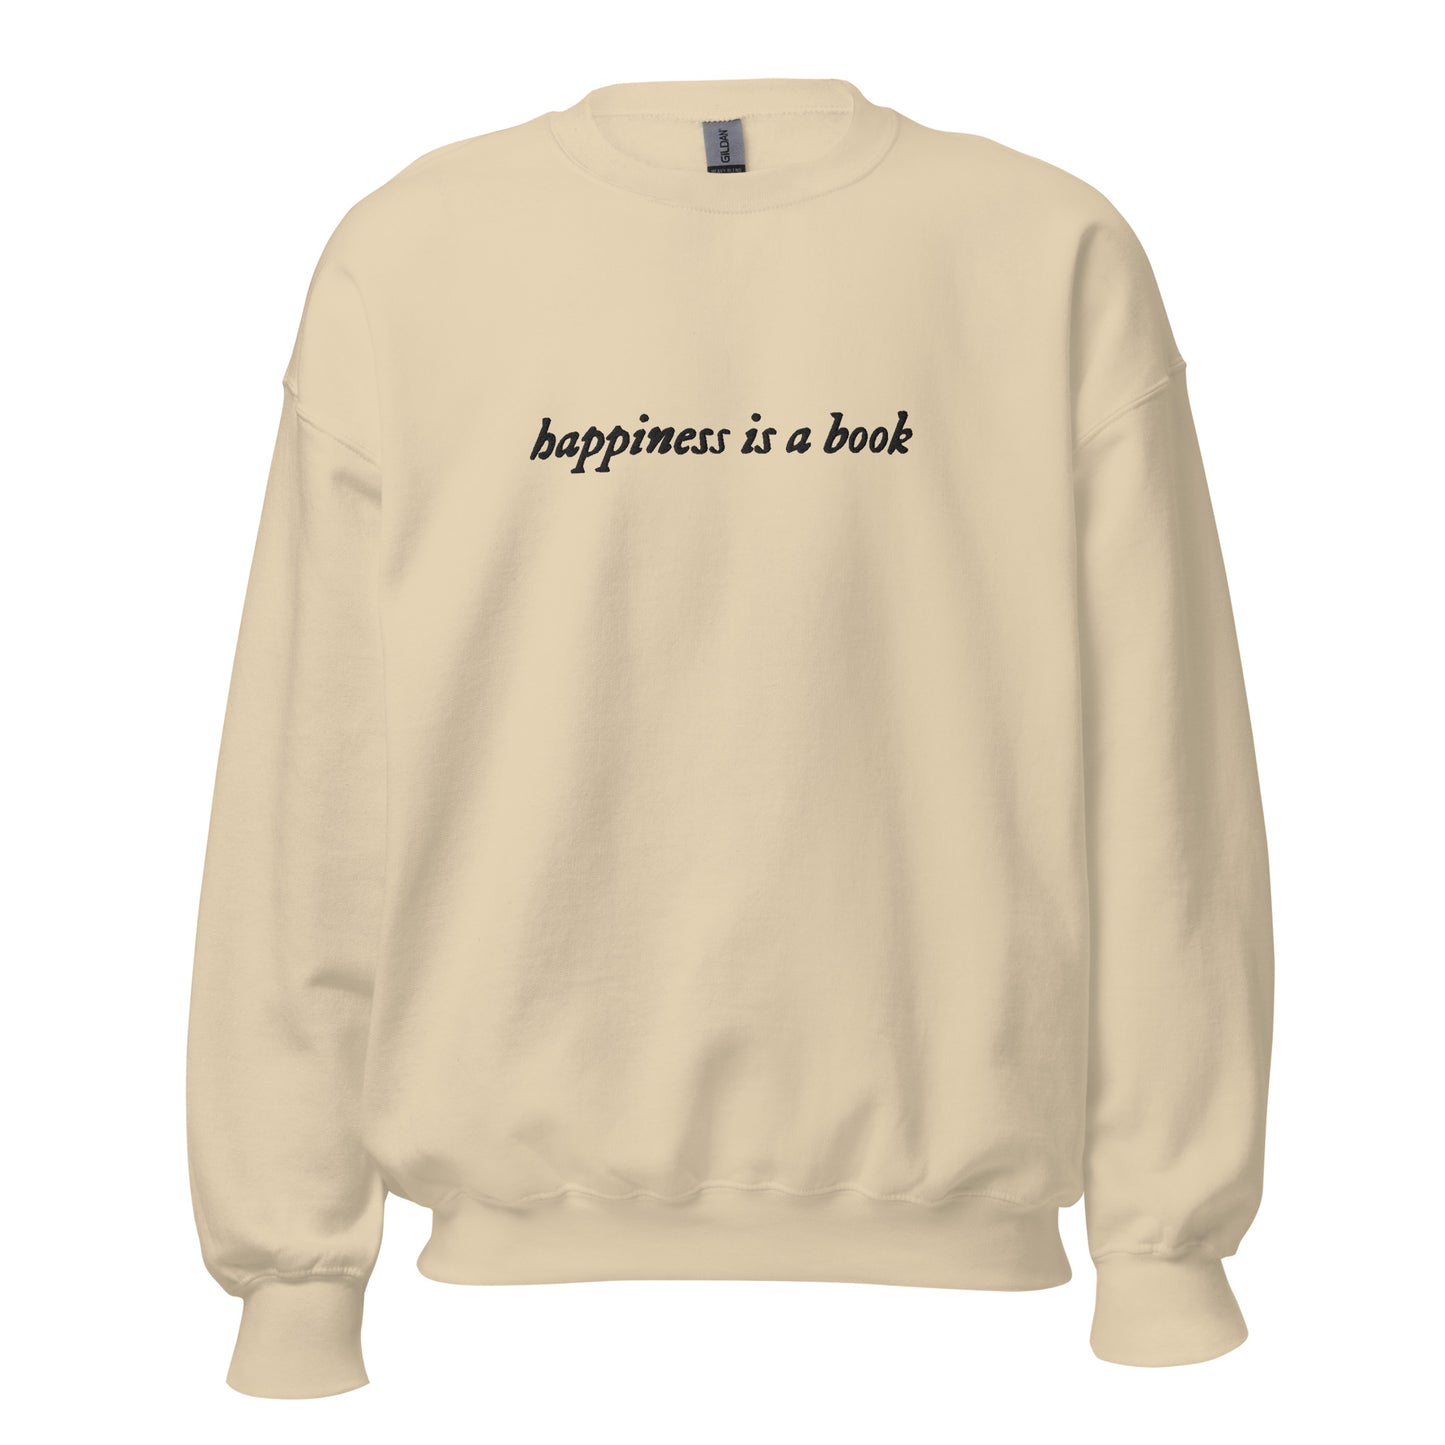 happiness is a book embroidered sweatshirt